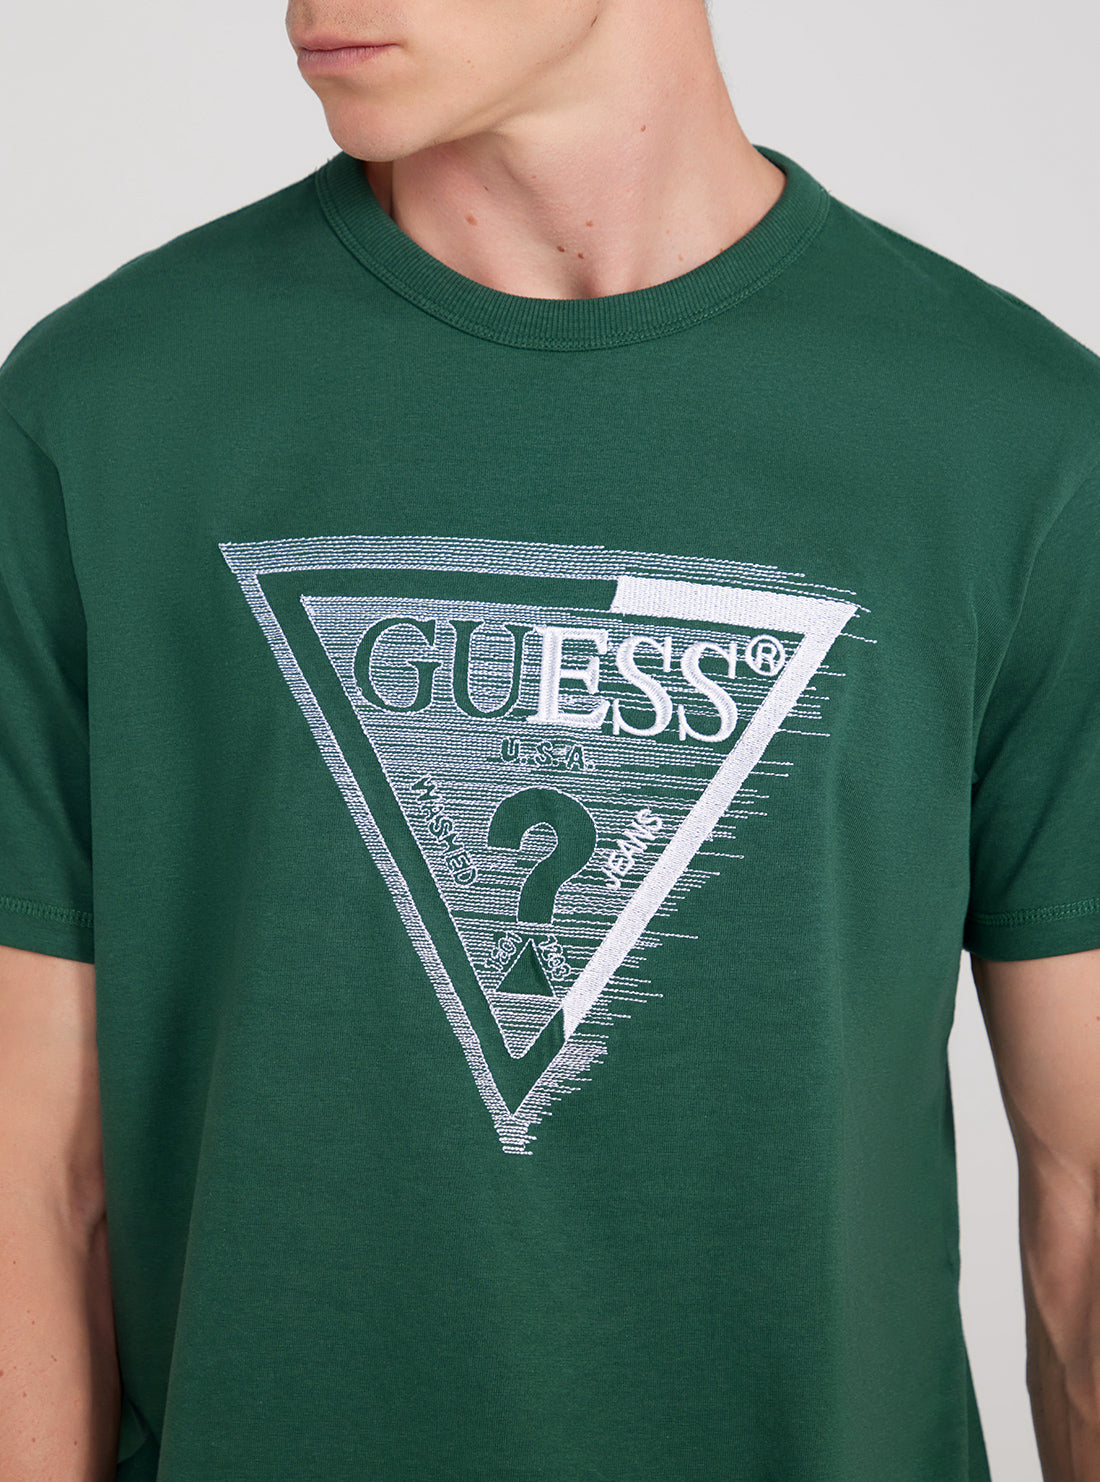 GUESS Green Short Sleeve Shaded Triangle T-Shirt detail view